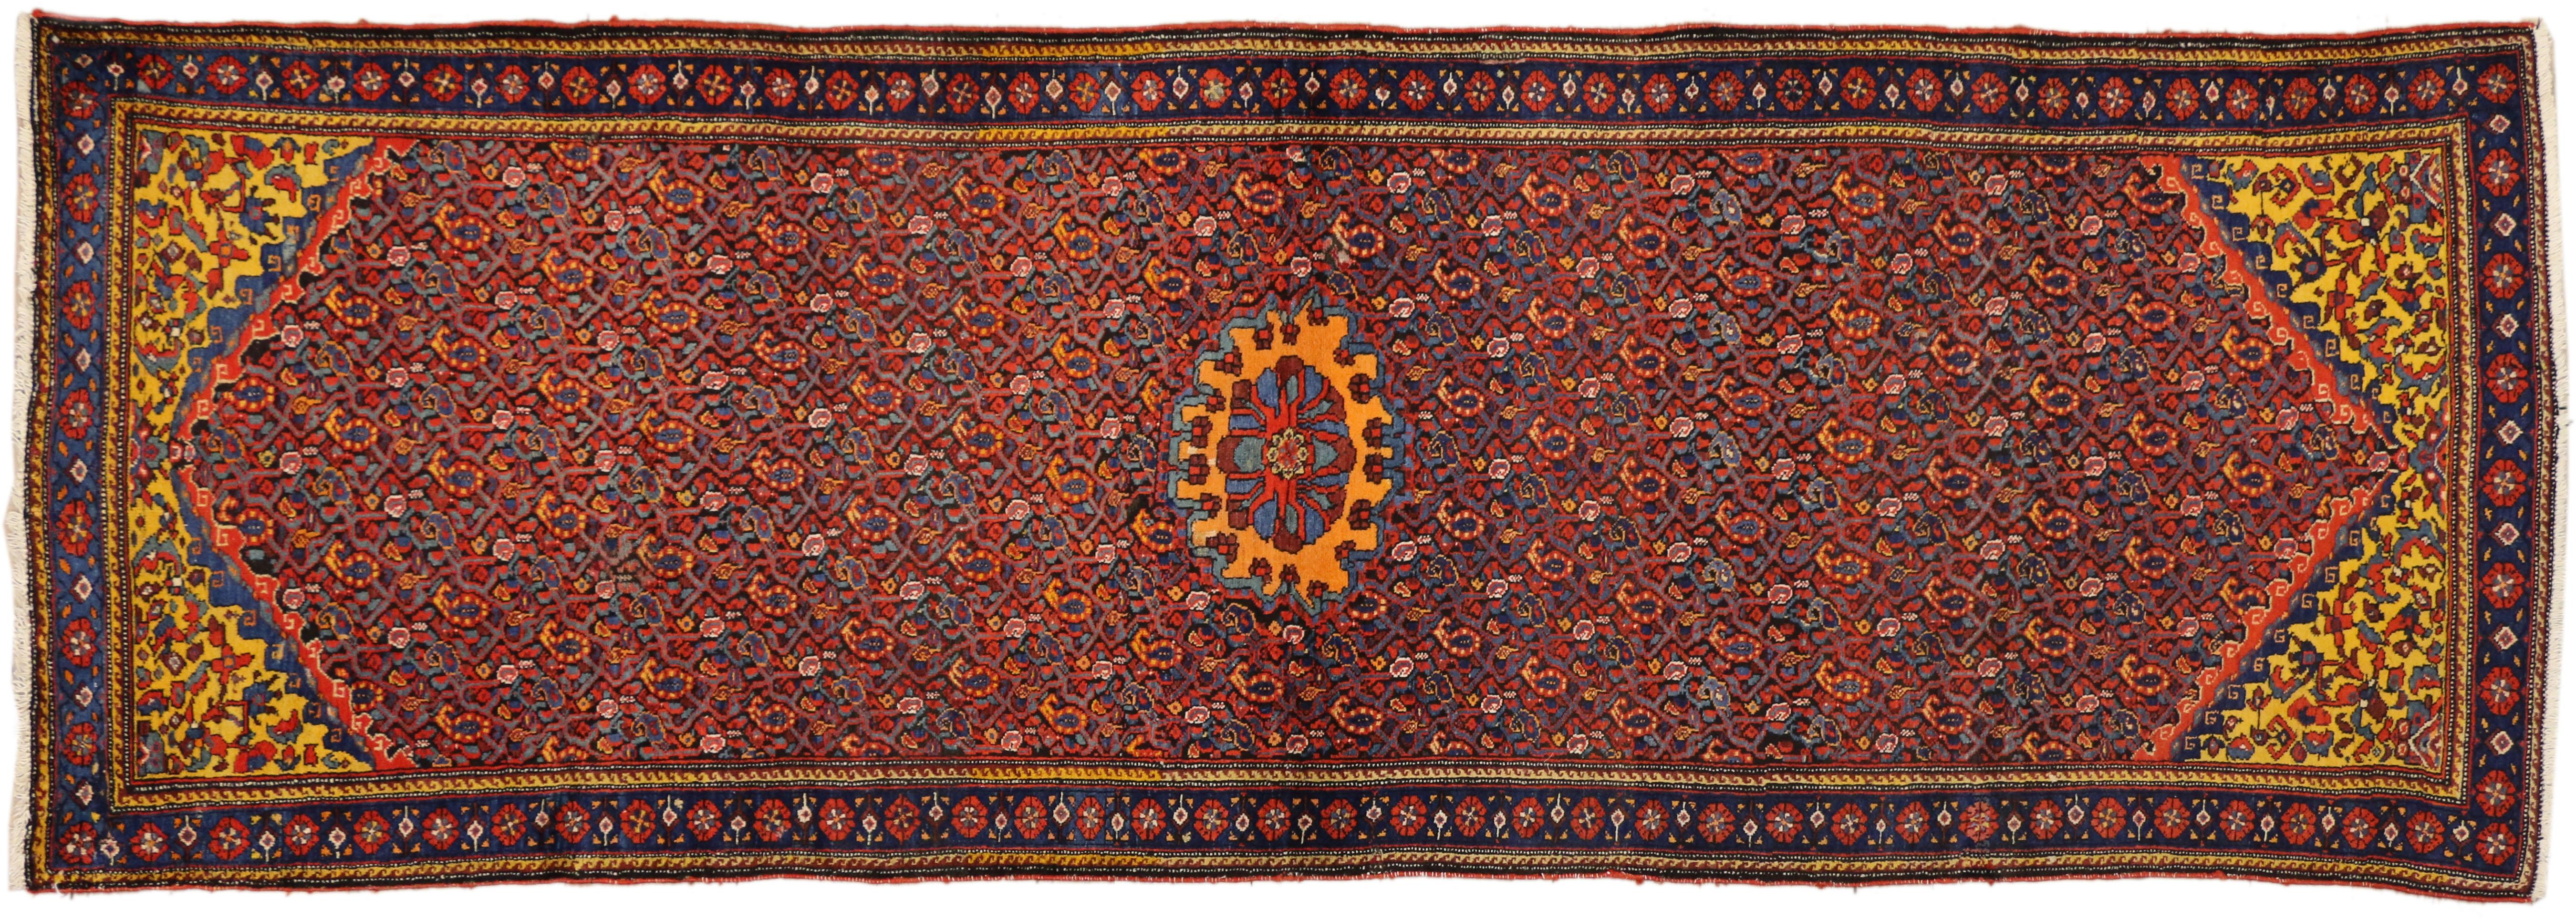 75378, vintage Persian Malayer runner with traditional style and vibrant colors. This hand-knotted wool vintage Persian Malayer carpet runner is patterned with whimsical boteh and vibrant colors that represent the versatile style of the small